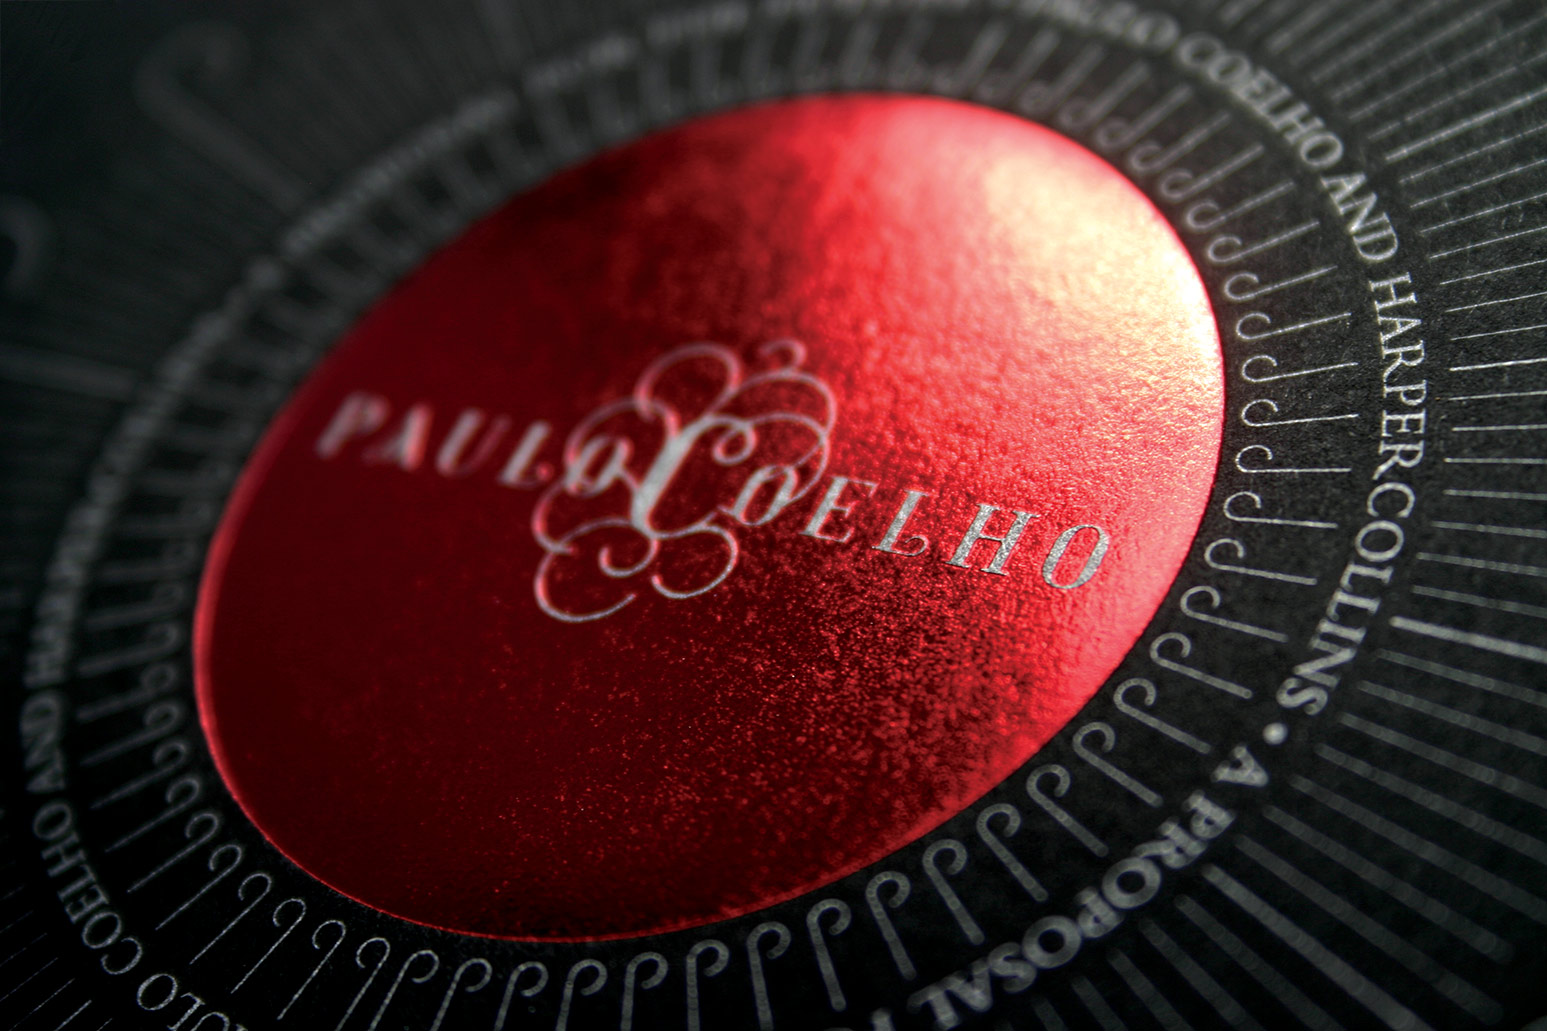 Paulo Coelho Harpercollins Promotional Collateral Foil Block 4